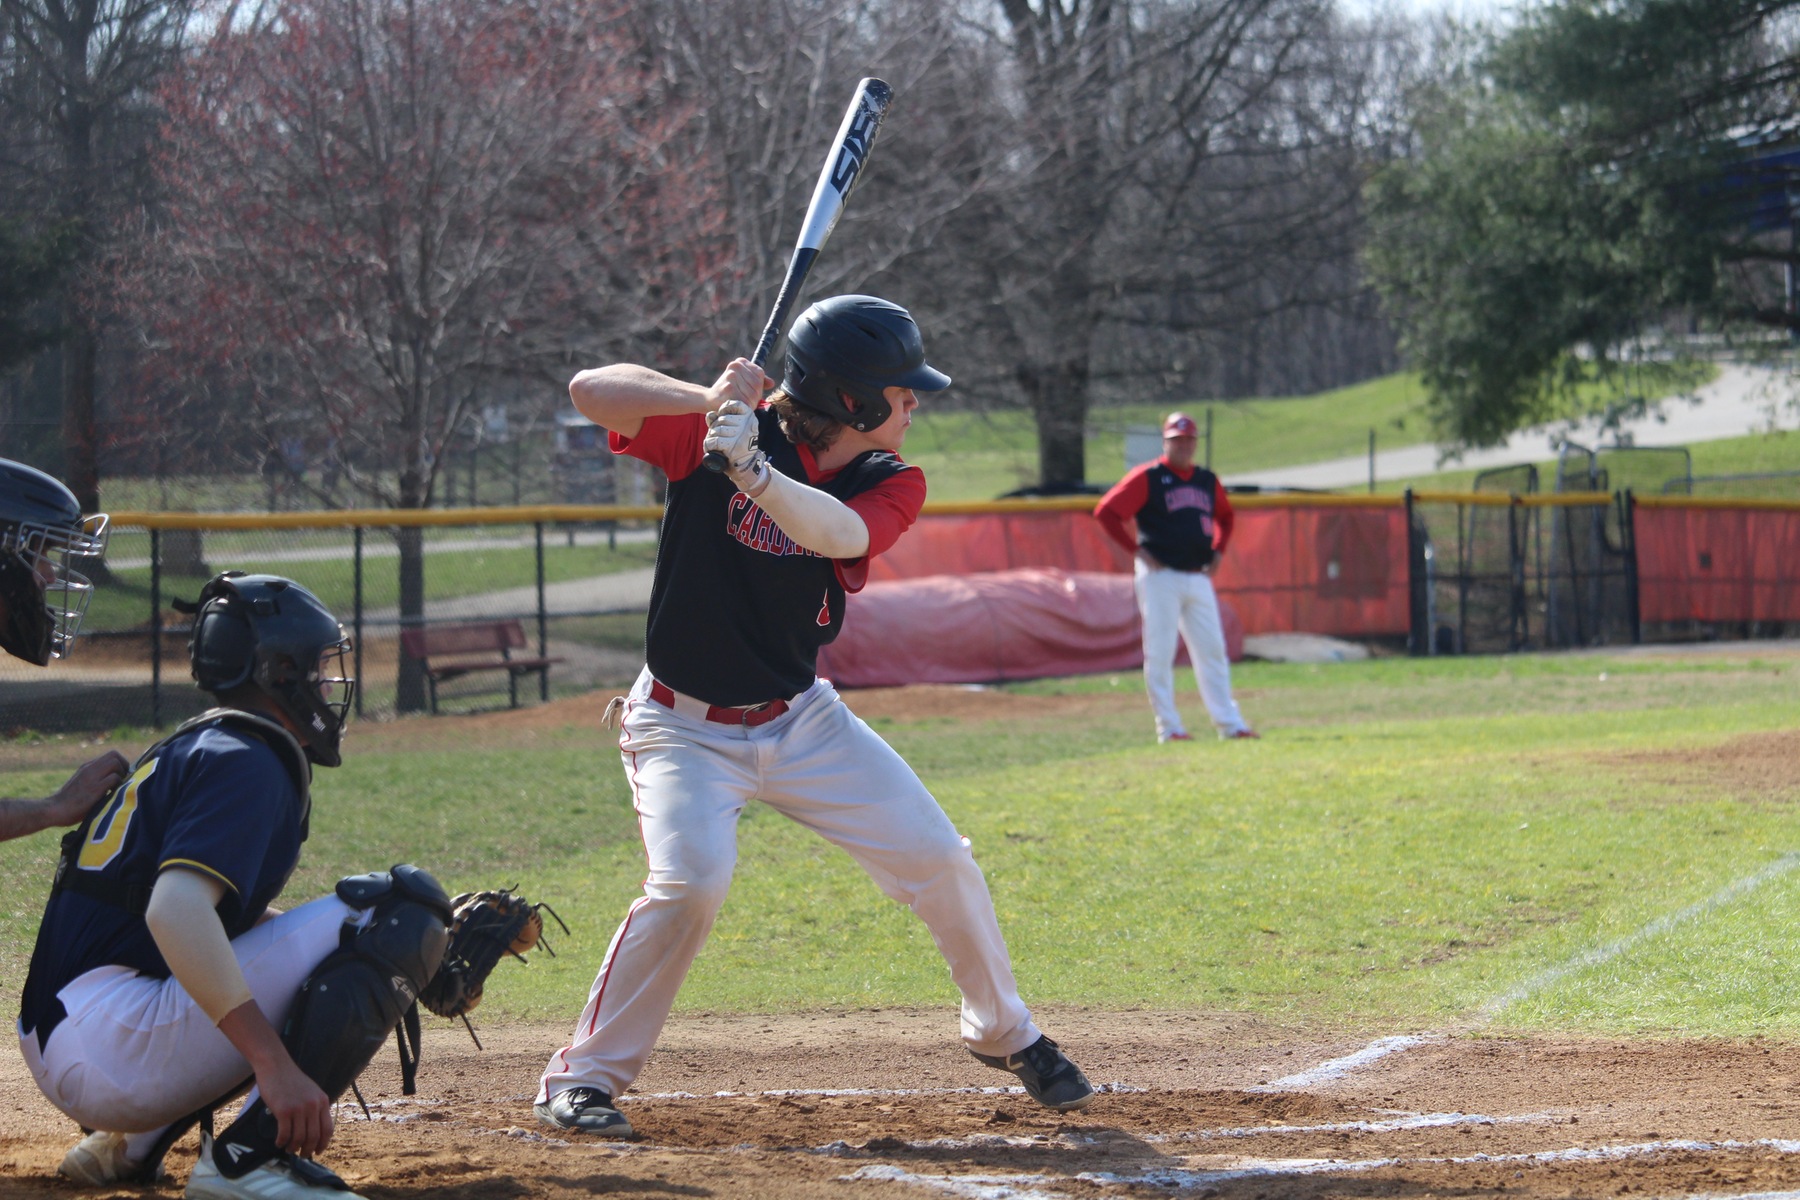 Late Rally Comes Up Short for Baseball against CCBC Essex